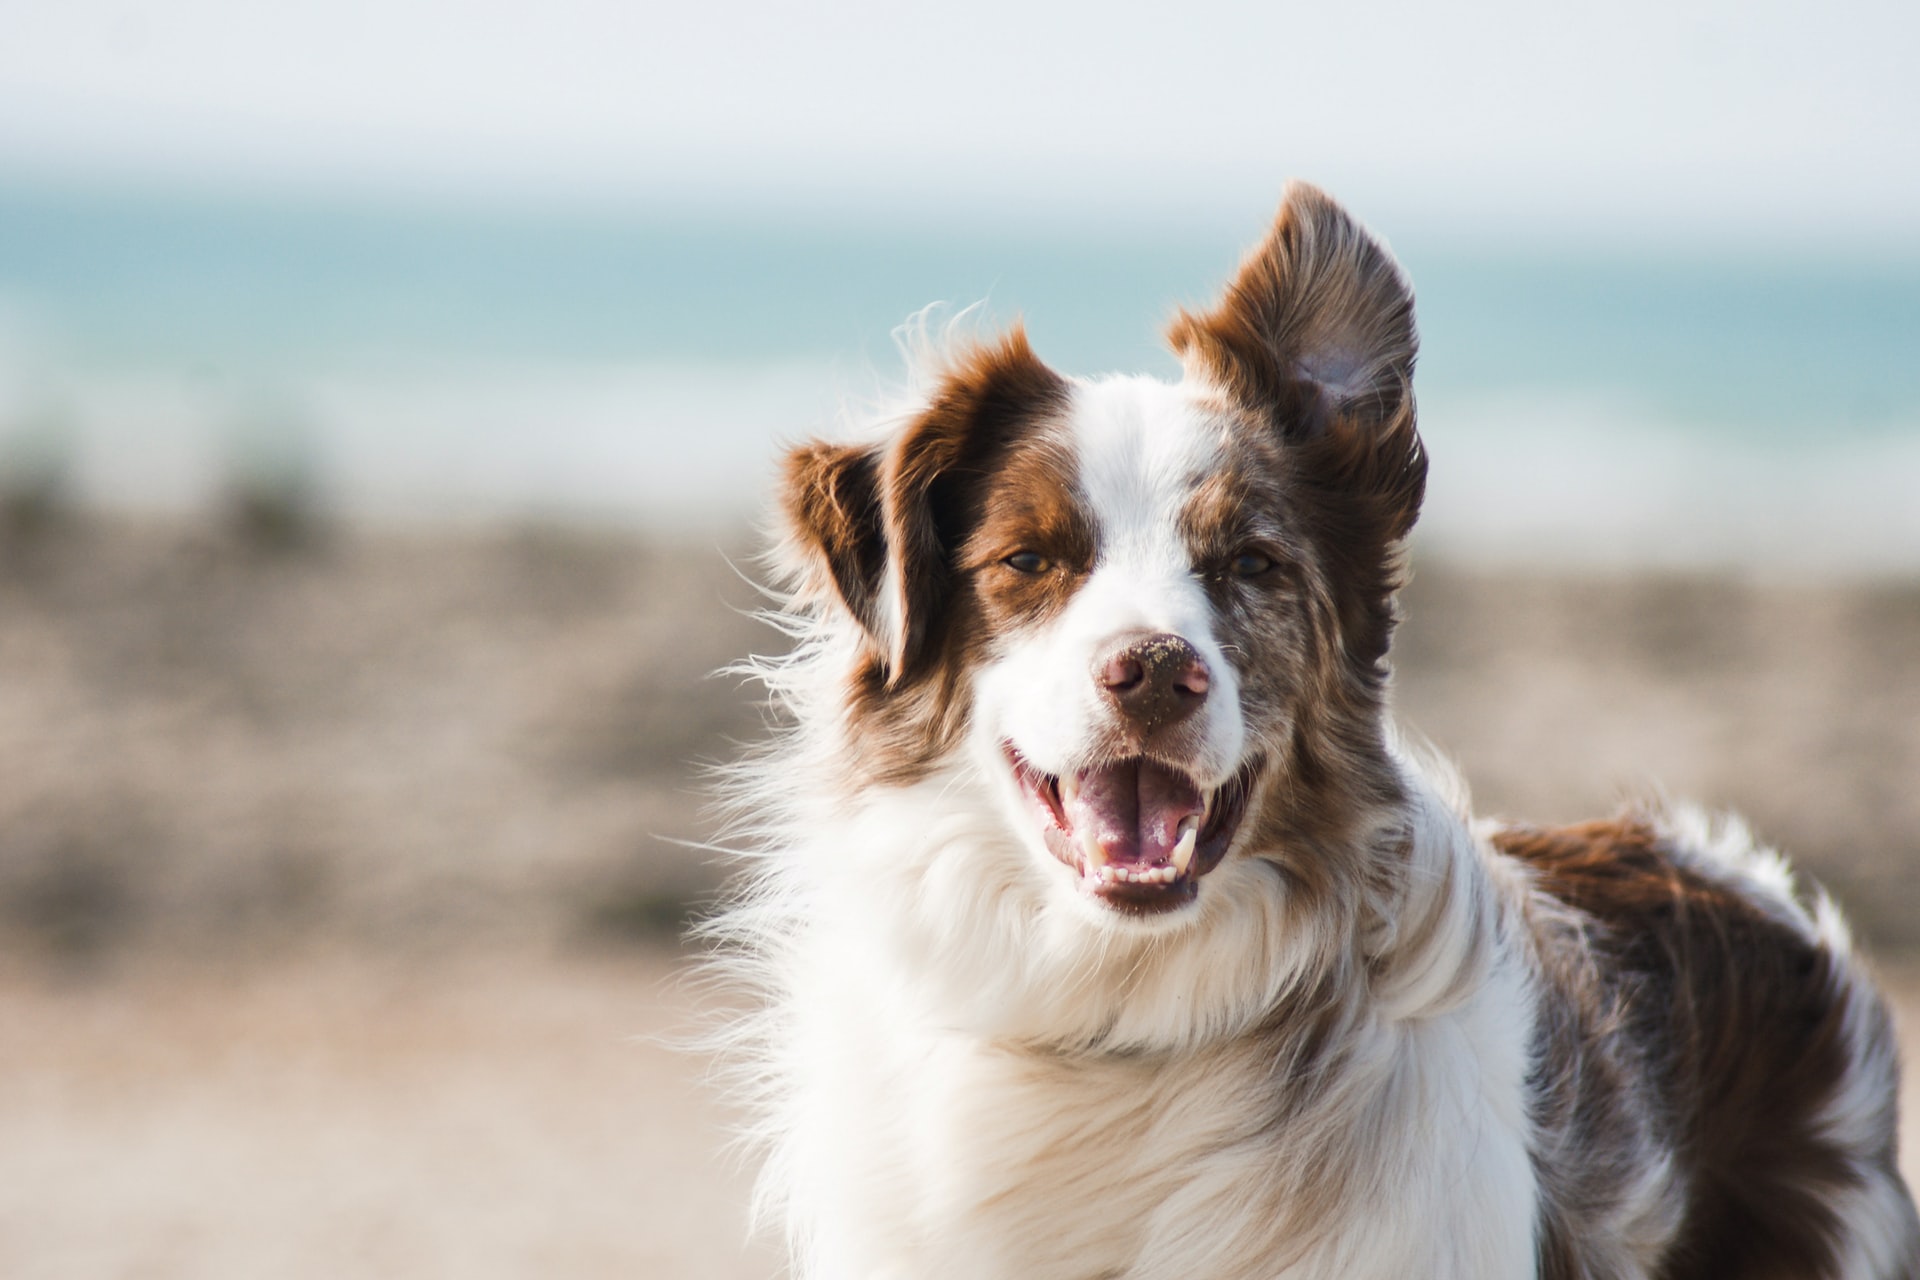 6 Fur Care Tips For Dog Owners